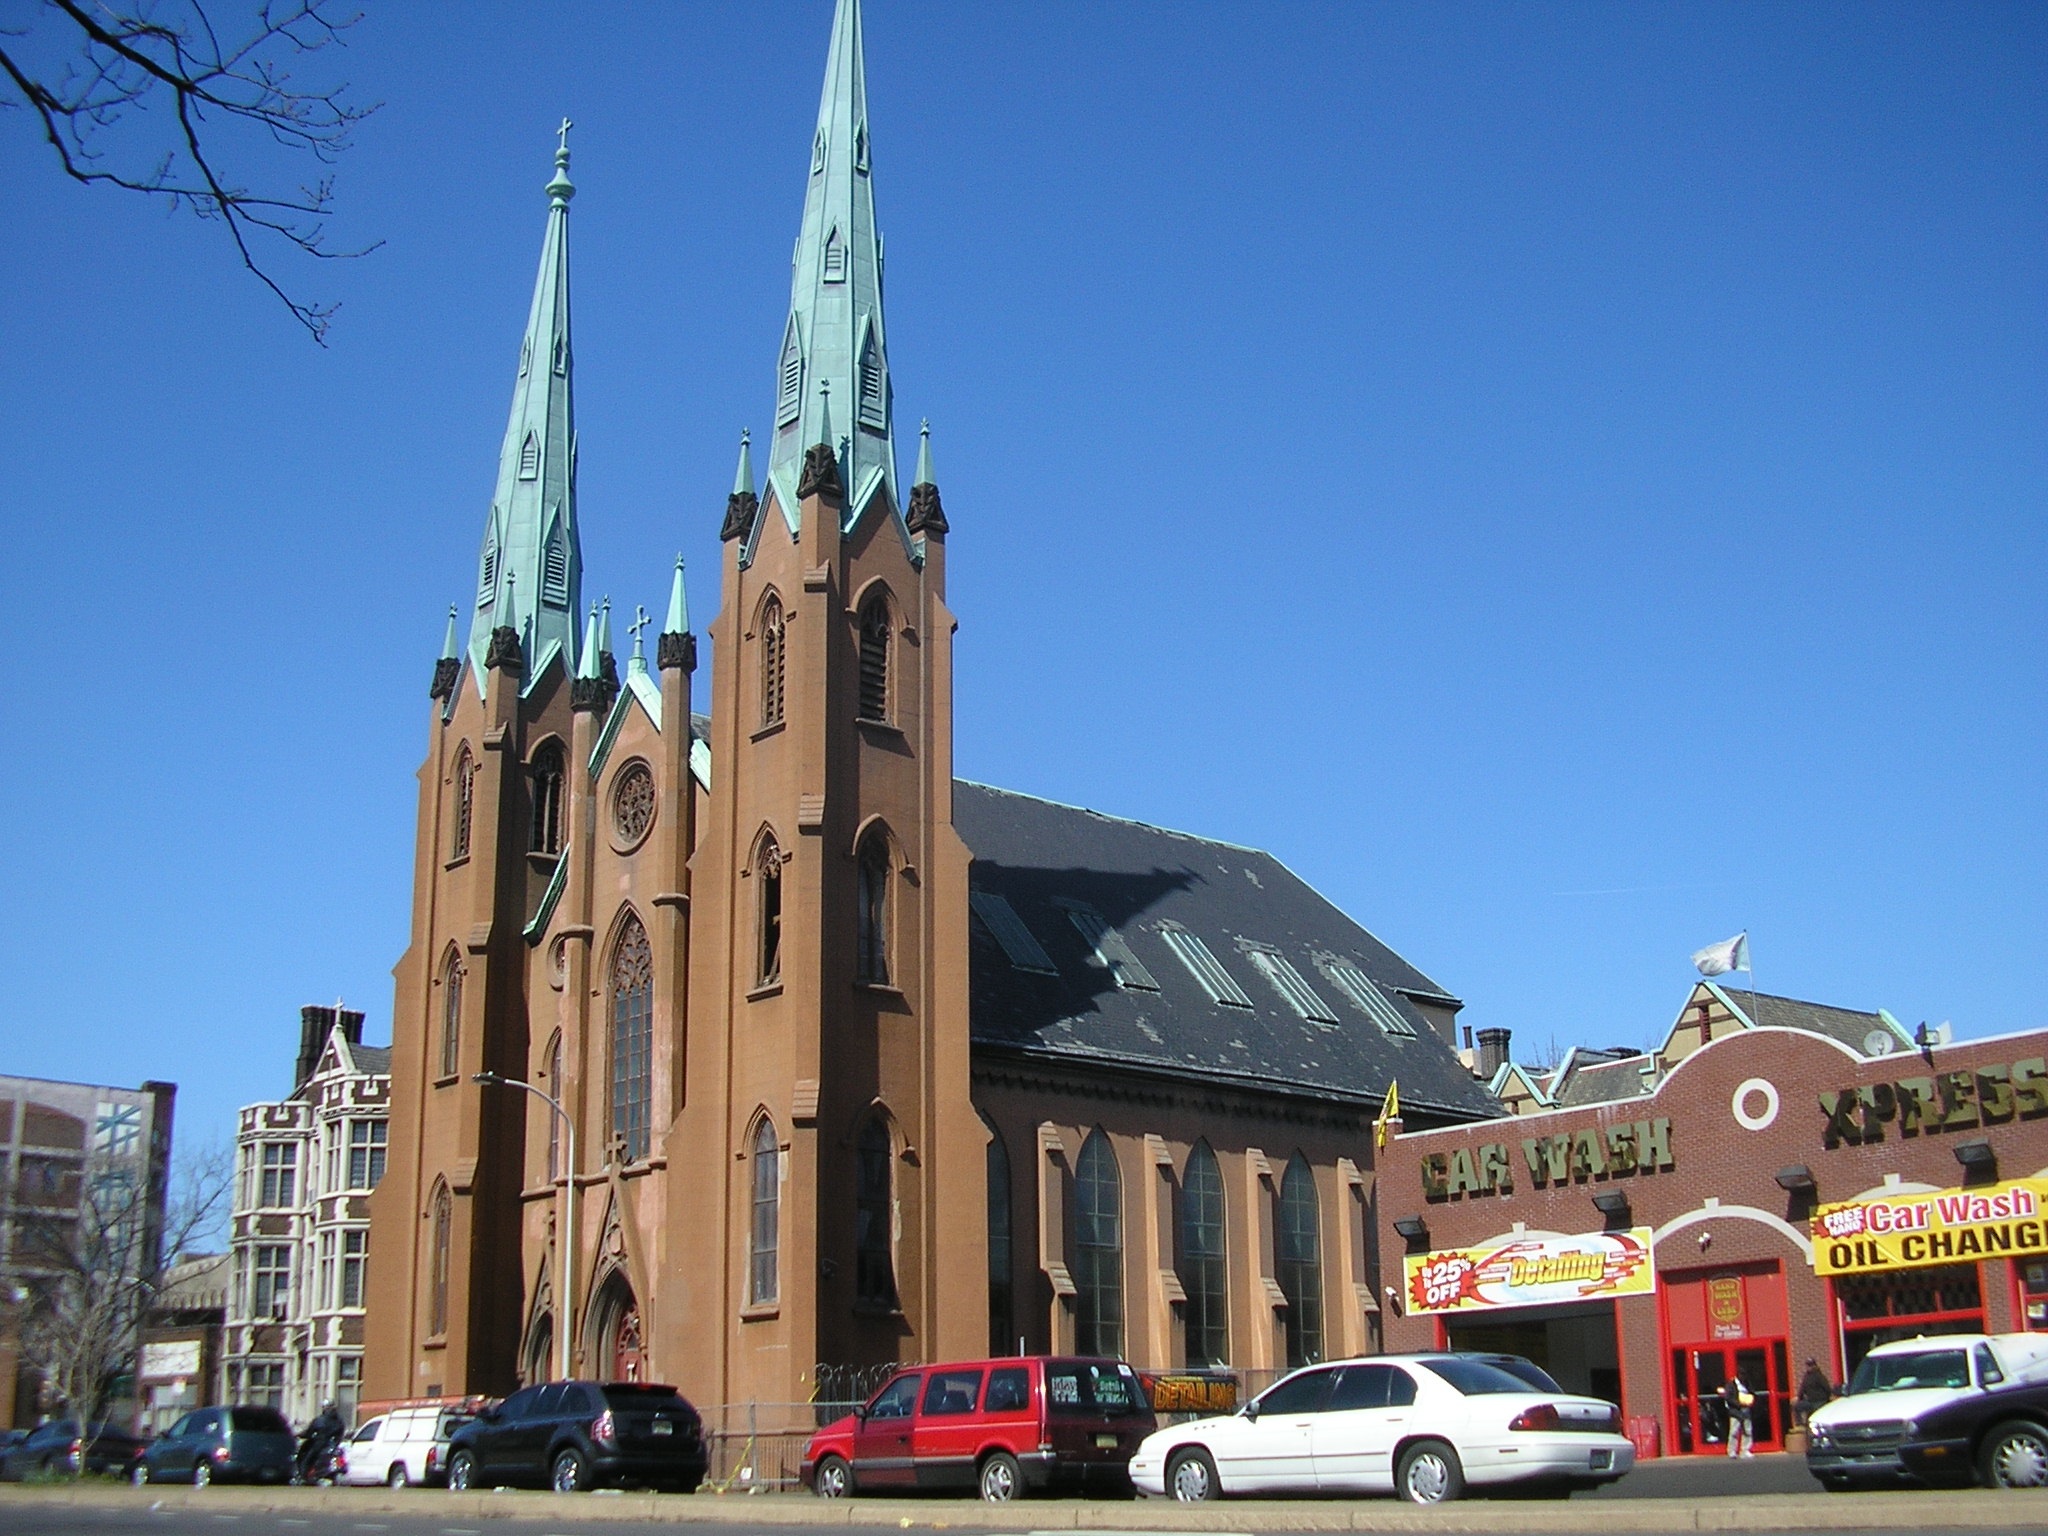 The church was built by architect Patrick Charles Keely in 1848-49.